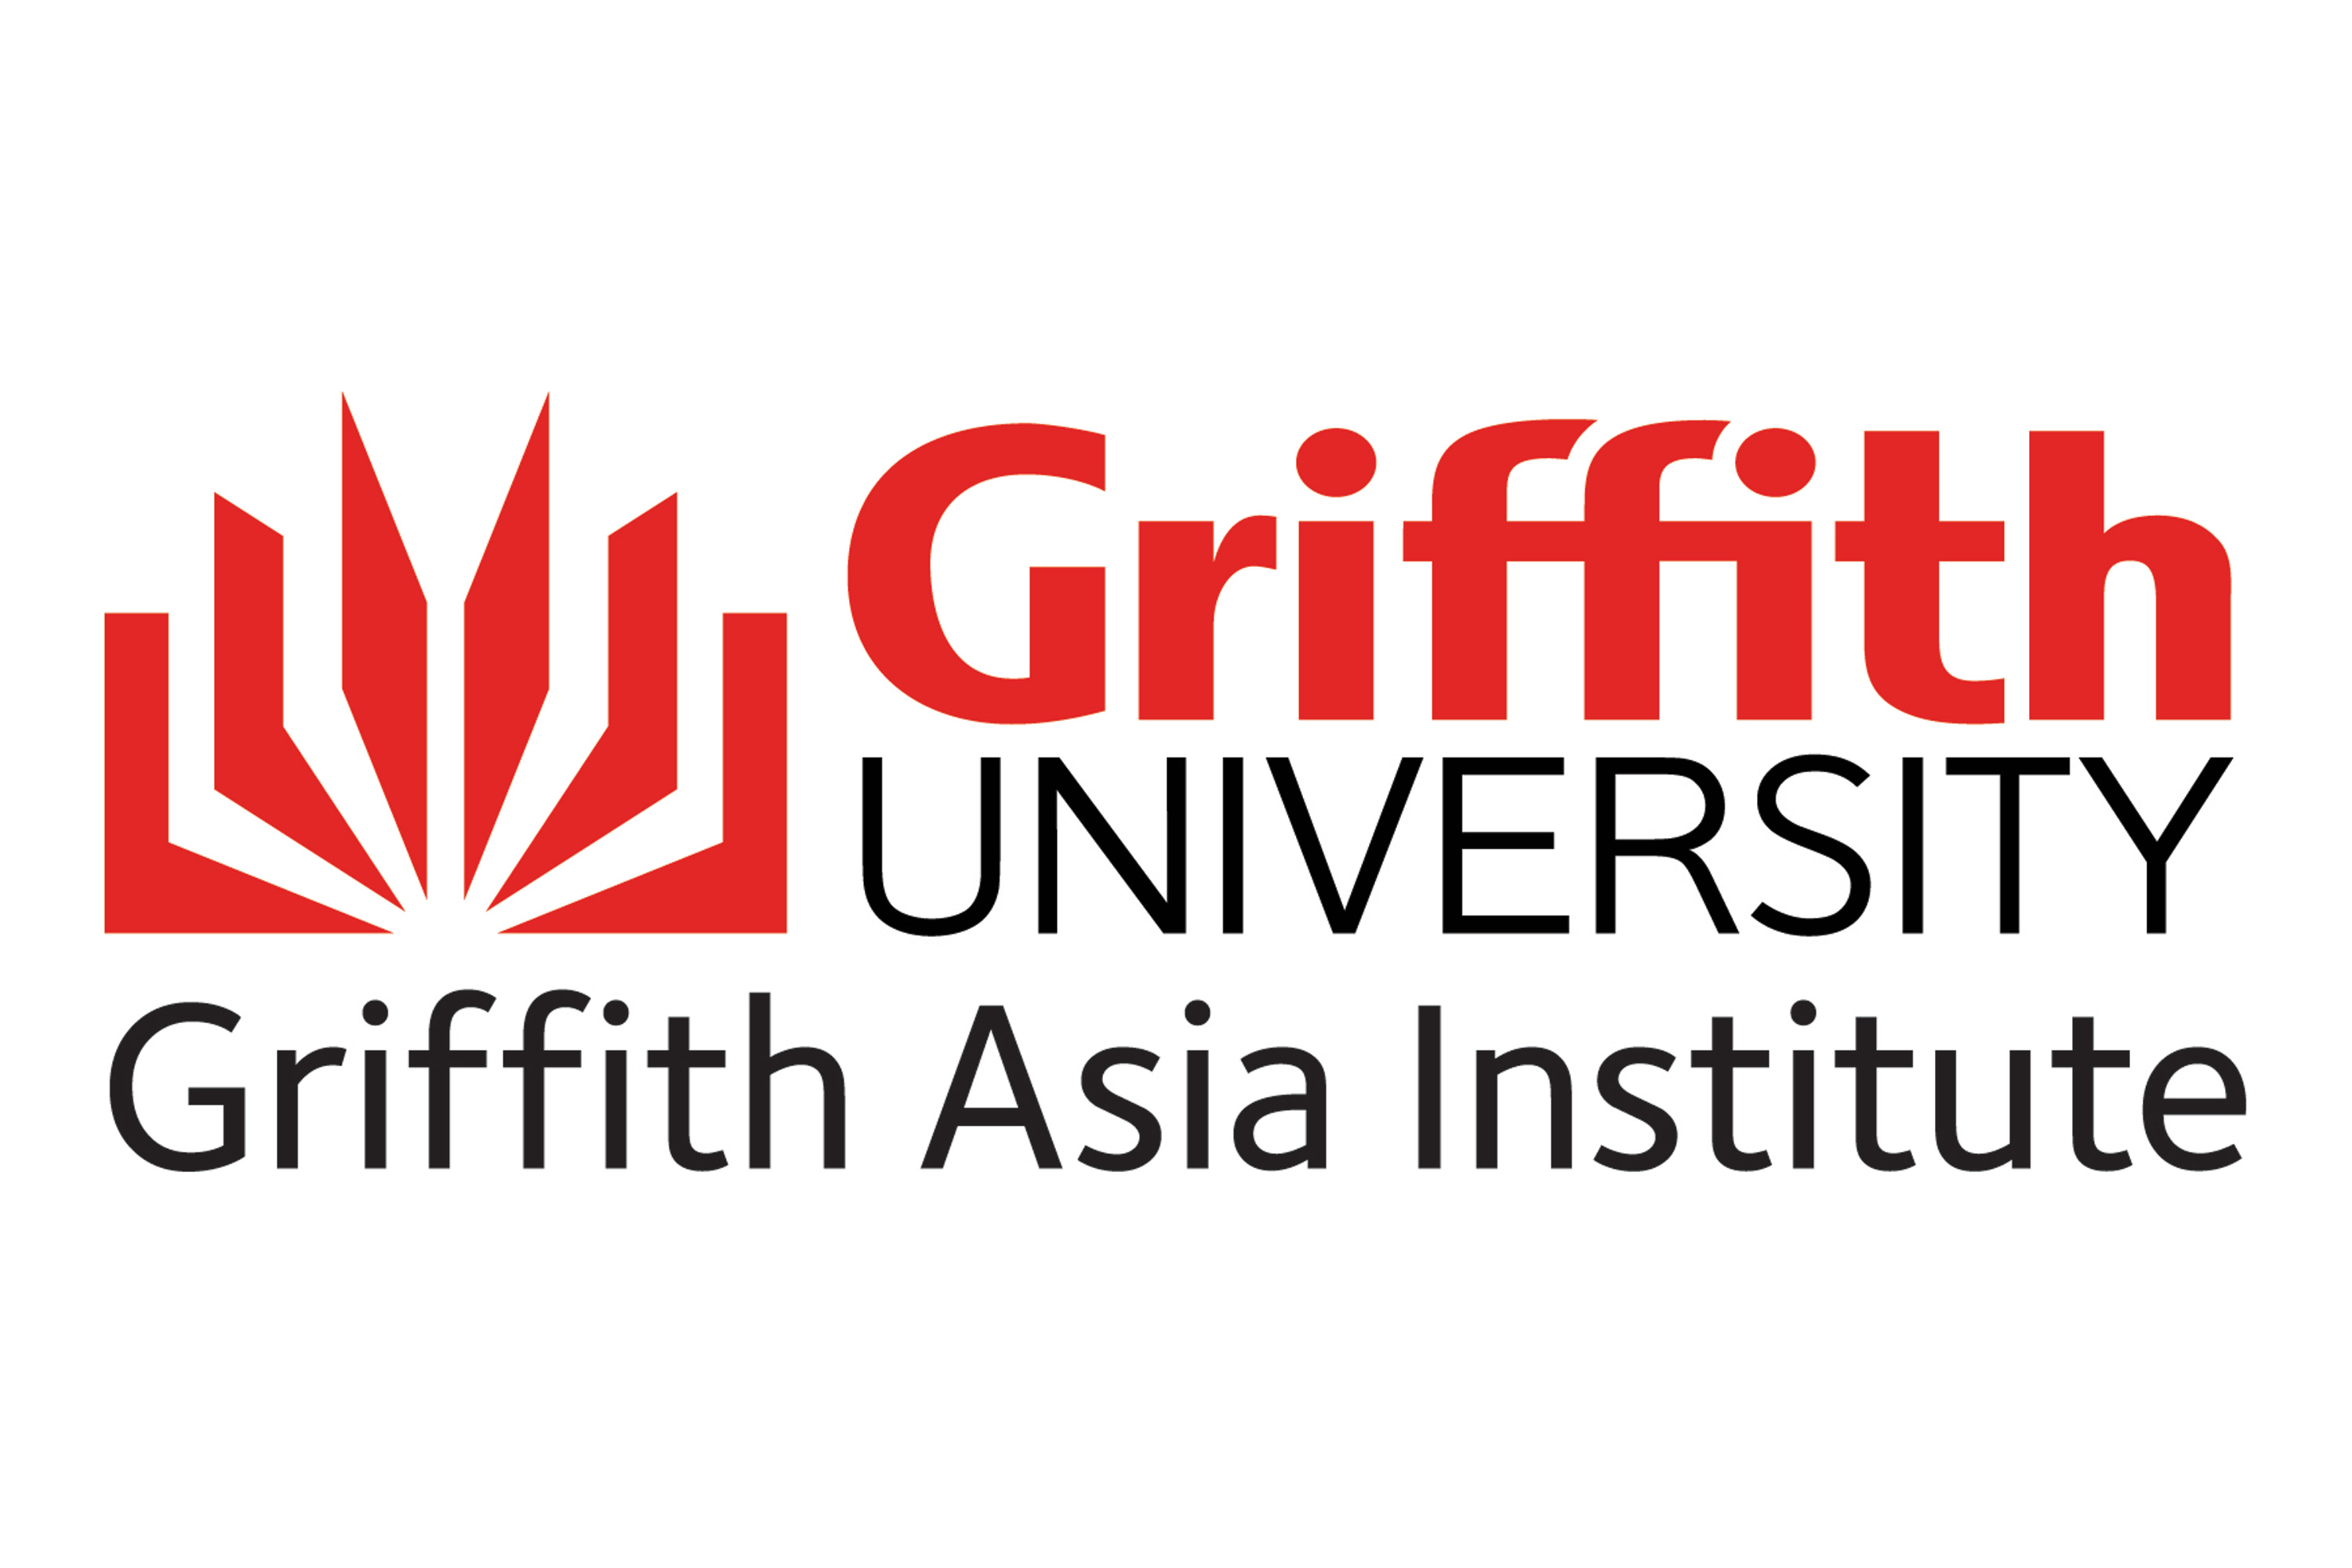 Griffith Asia Institute Research Seminar: On the Importance of Being Uncertain: The Security Dilemma and Strategic Competition in East Asia 